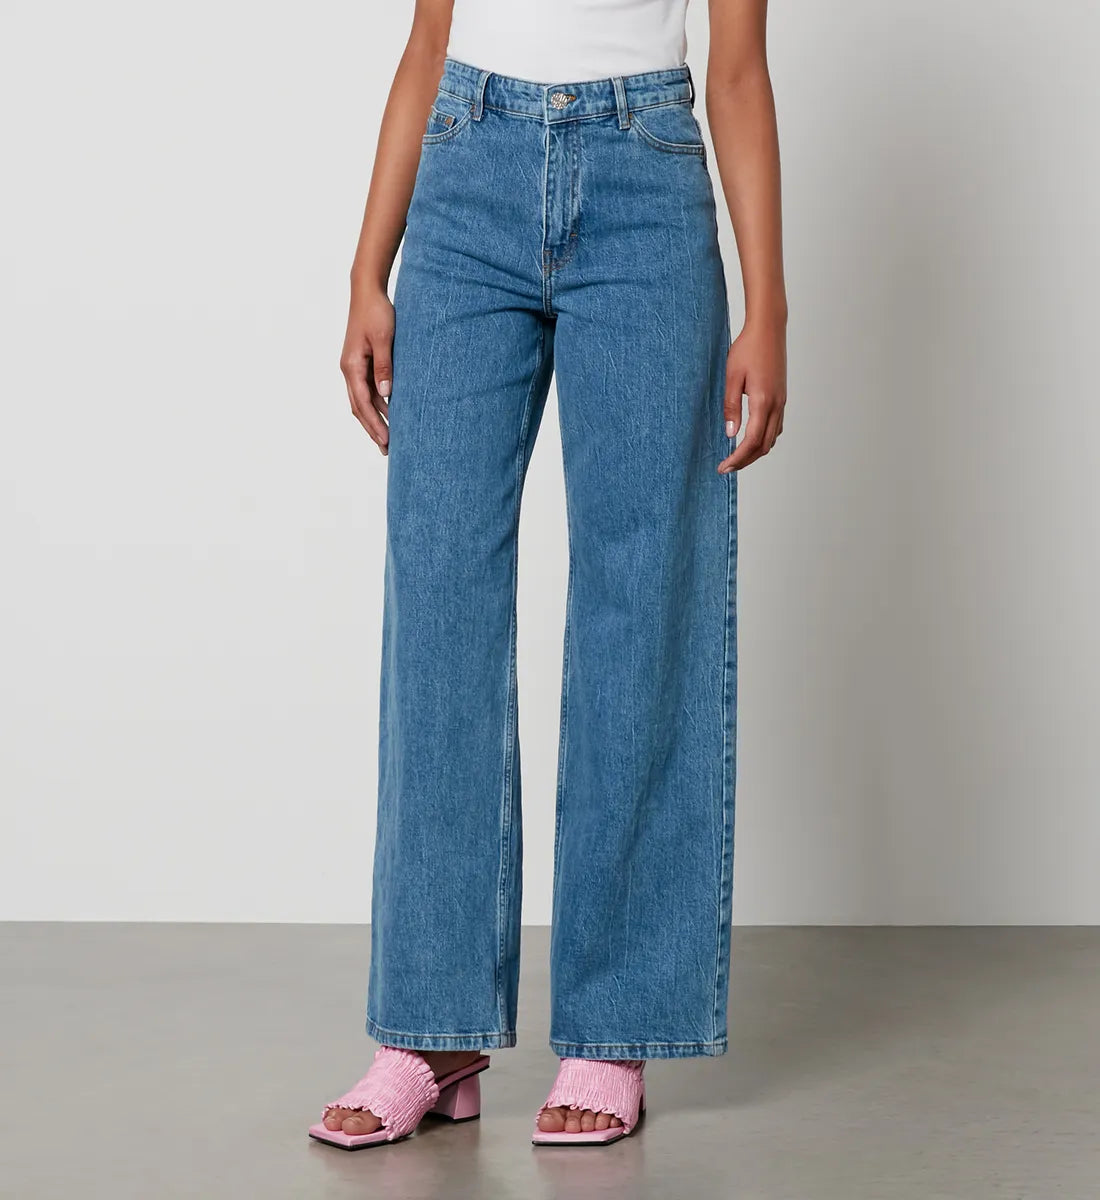 Straight leg mid blue high waisted jeans with zip fly and silver button fastening